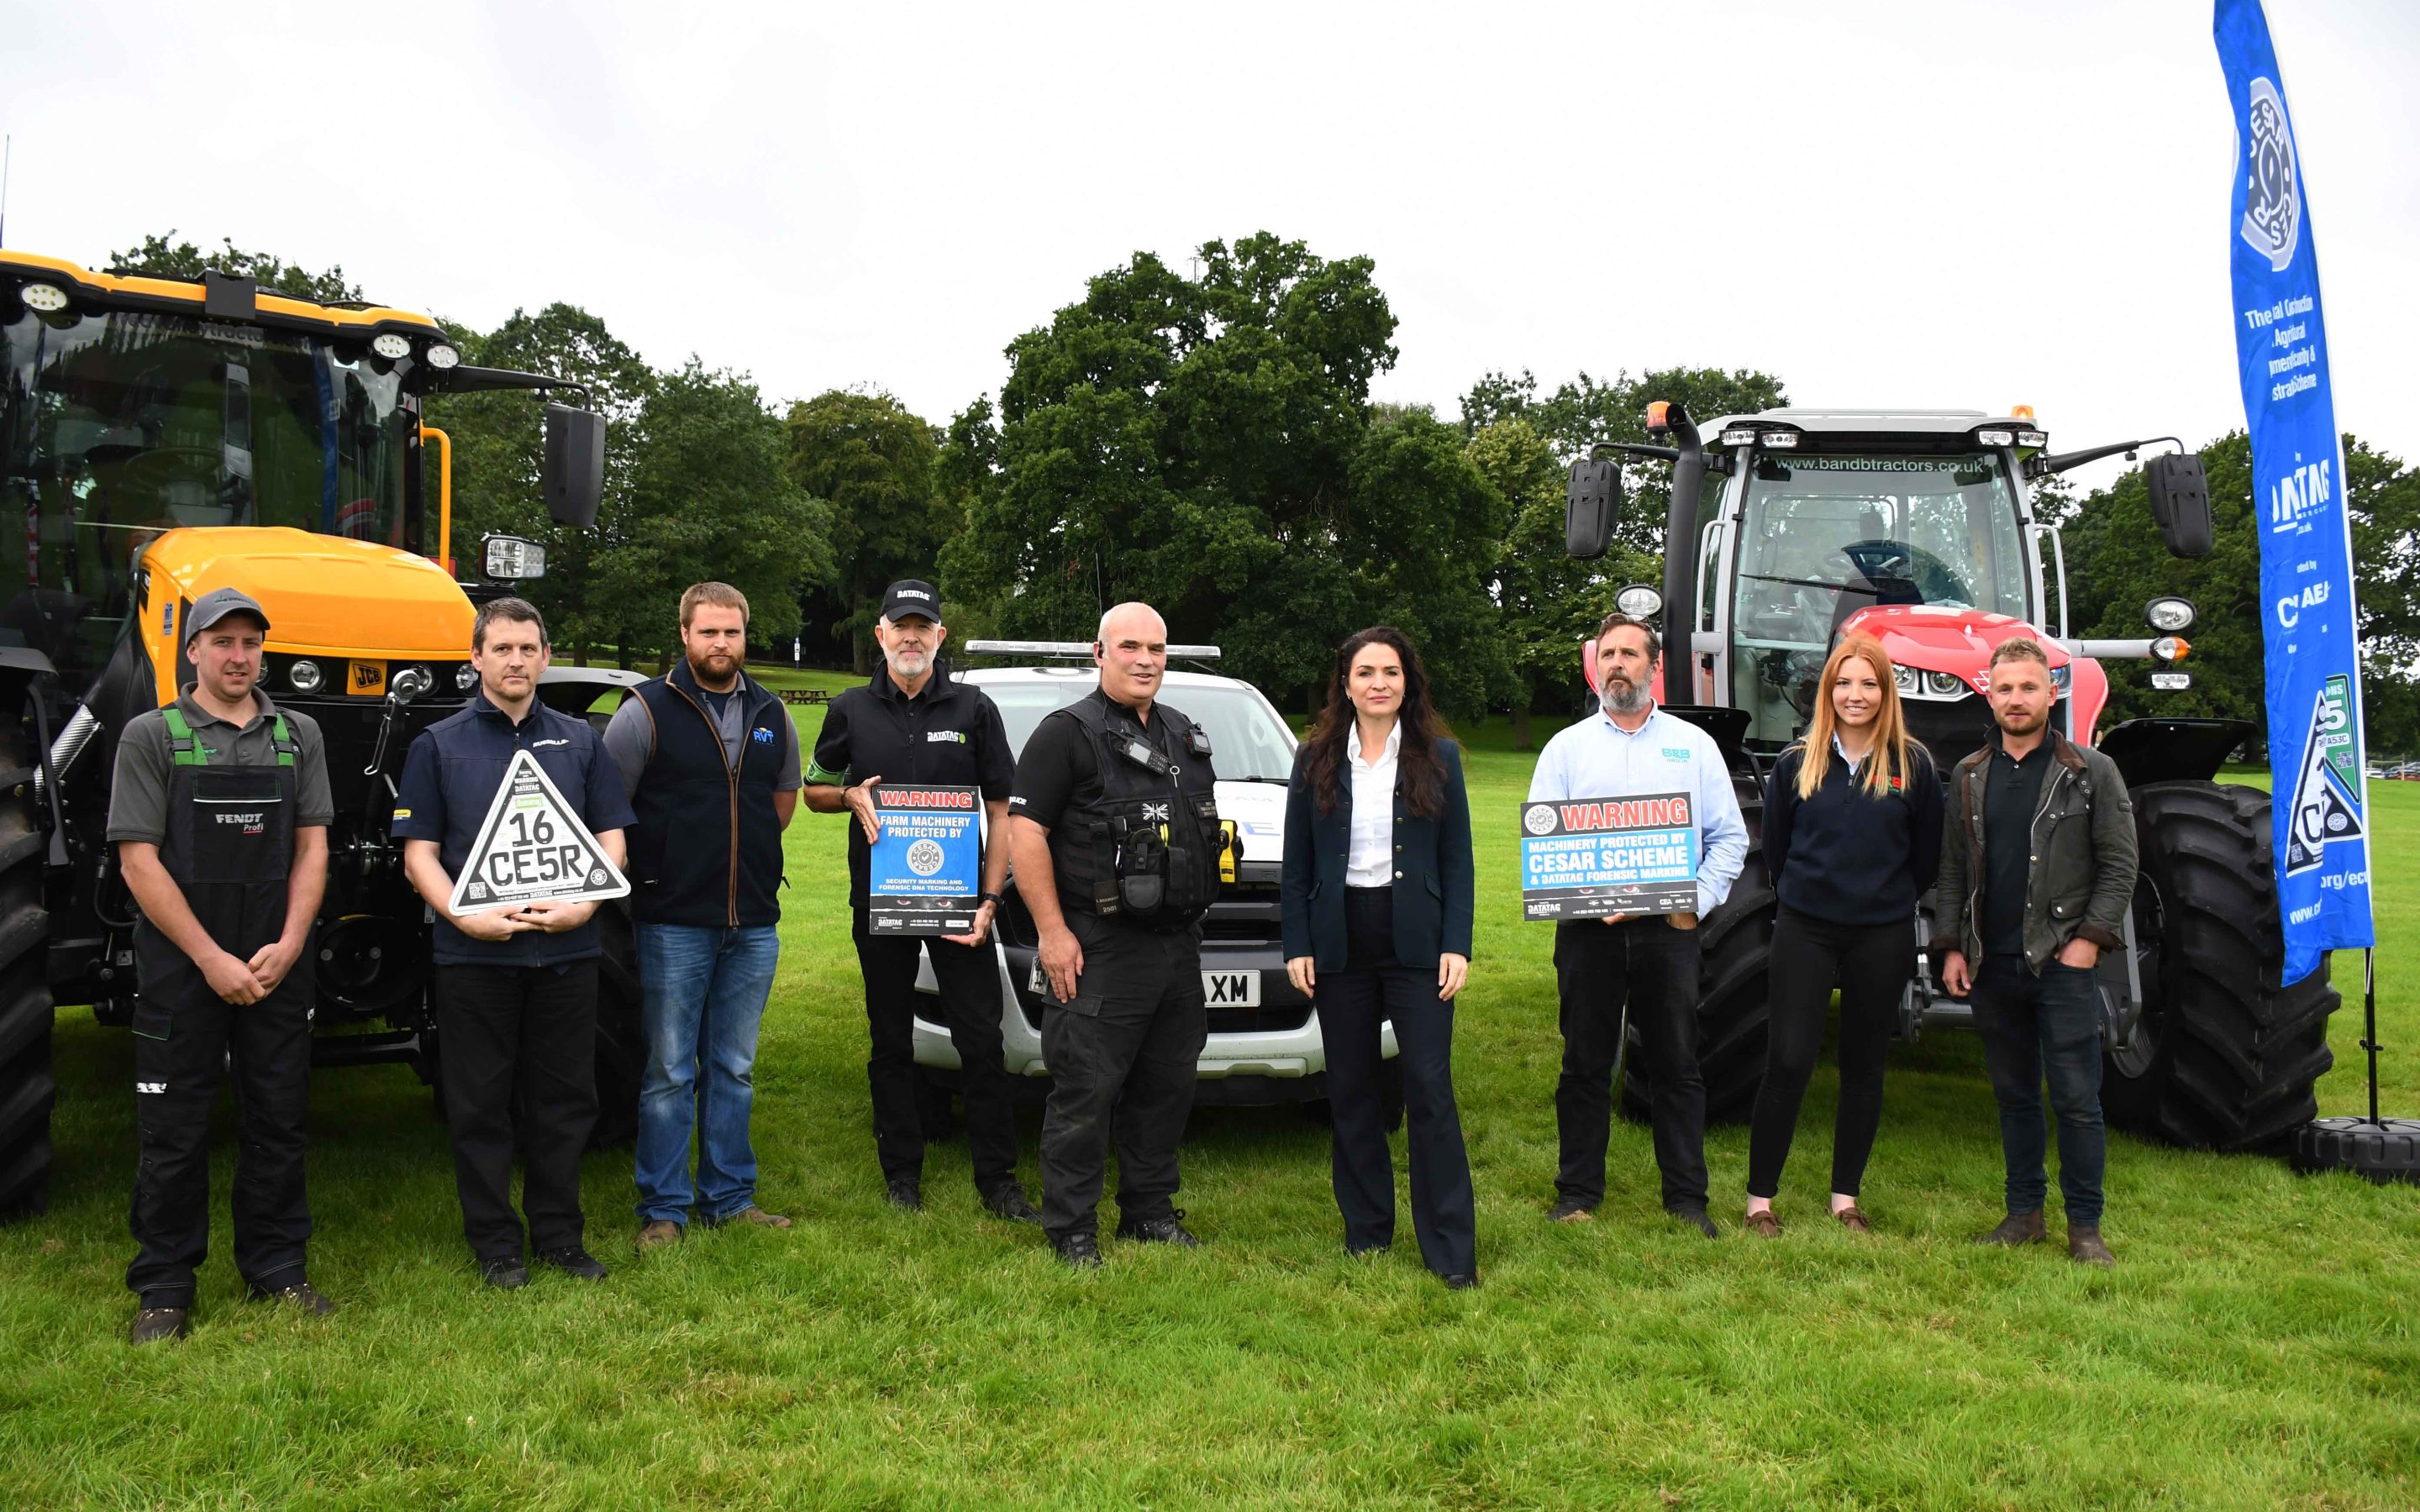 Police and Crime Commissioner with rural crime team in front of tractors in a field